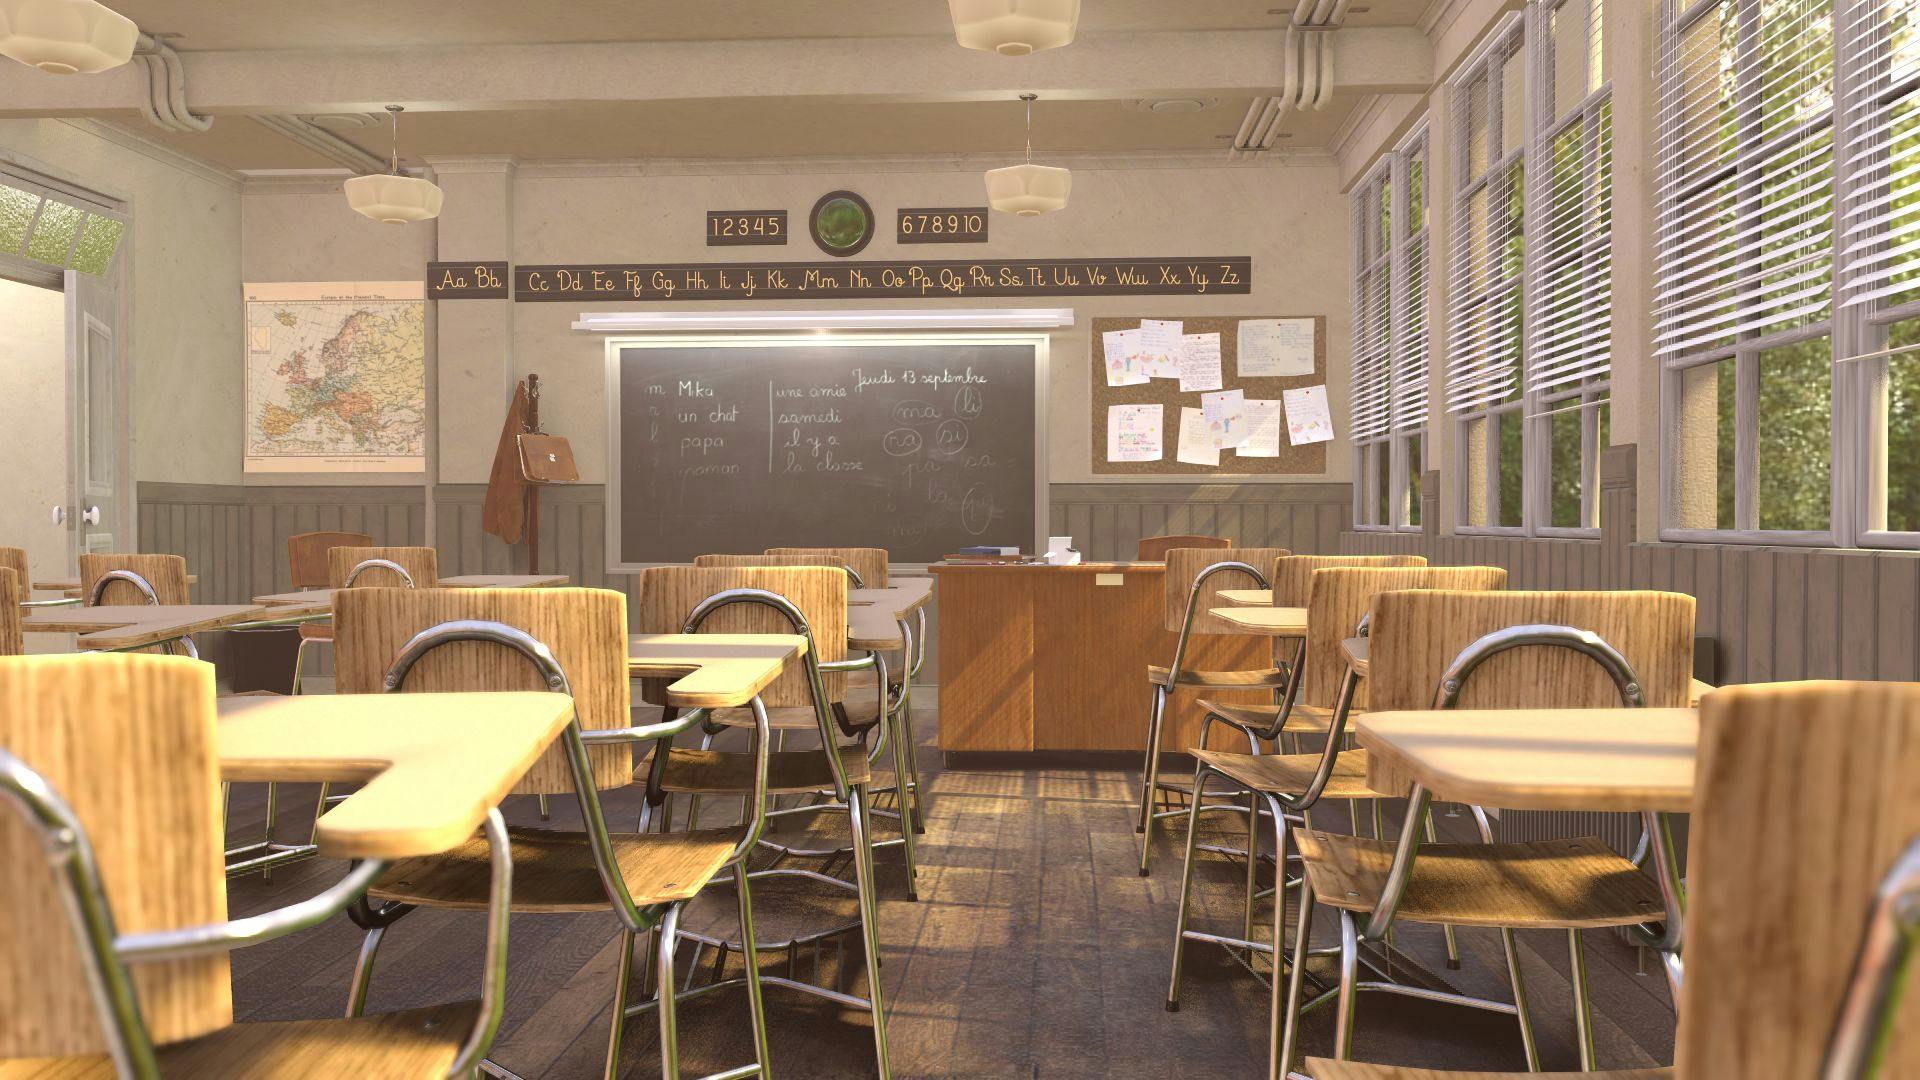 The Blender "classroom" scene. Invisible students sit in their chair-desk units, watching their invisible teacher write notes on a black chalkboard.